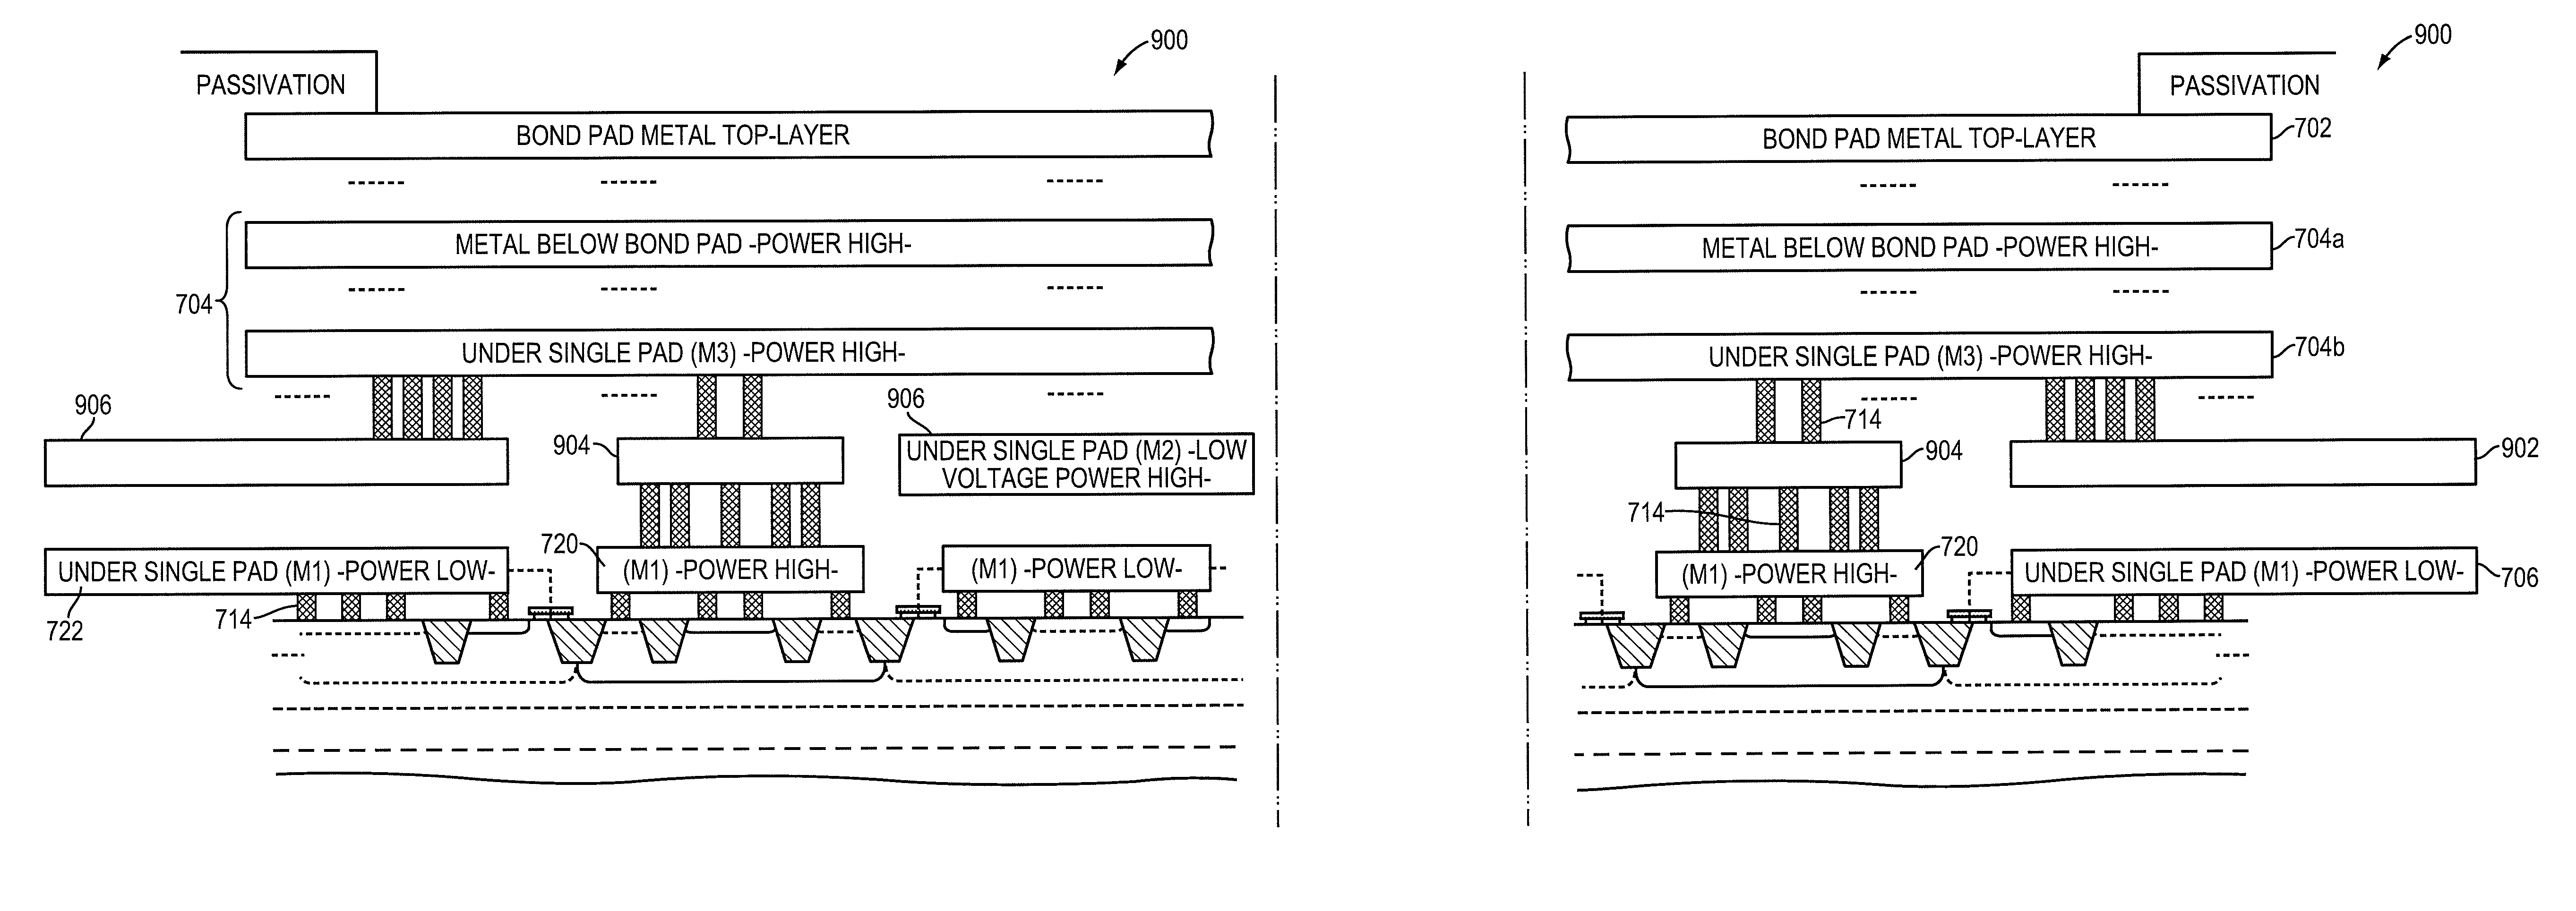 Bond pad with integrated transient over-voltage protection